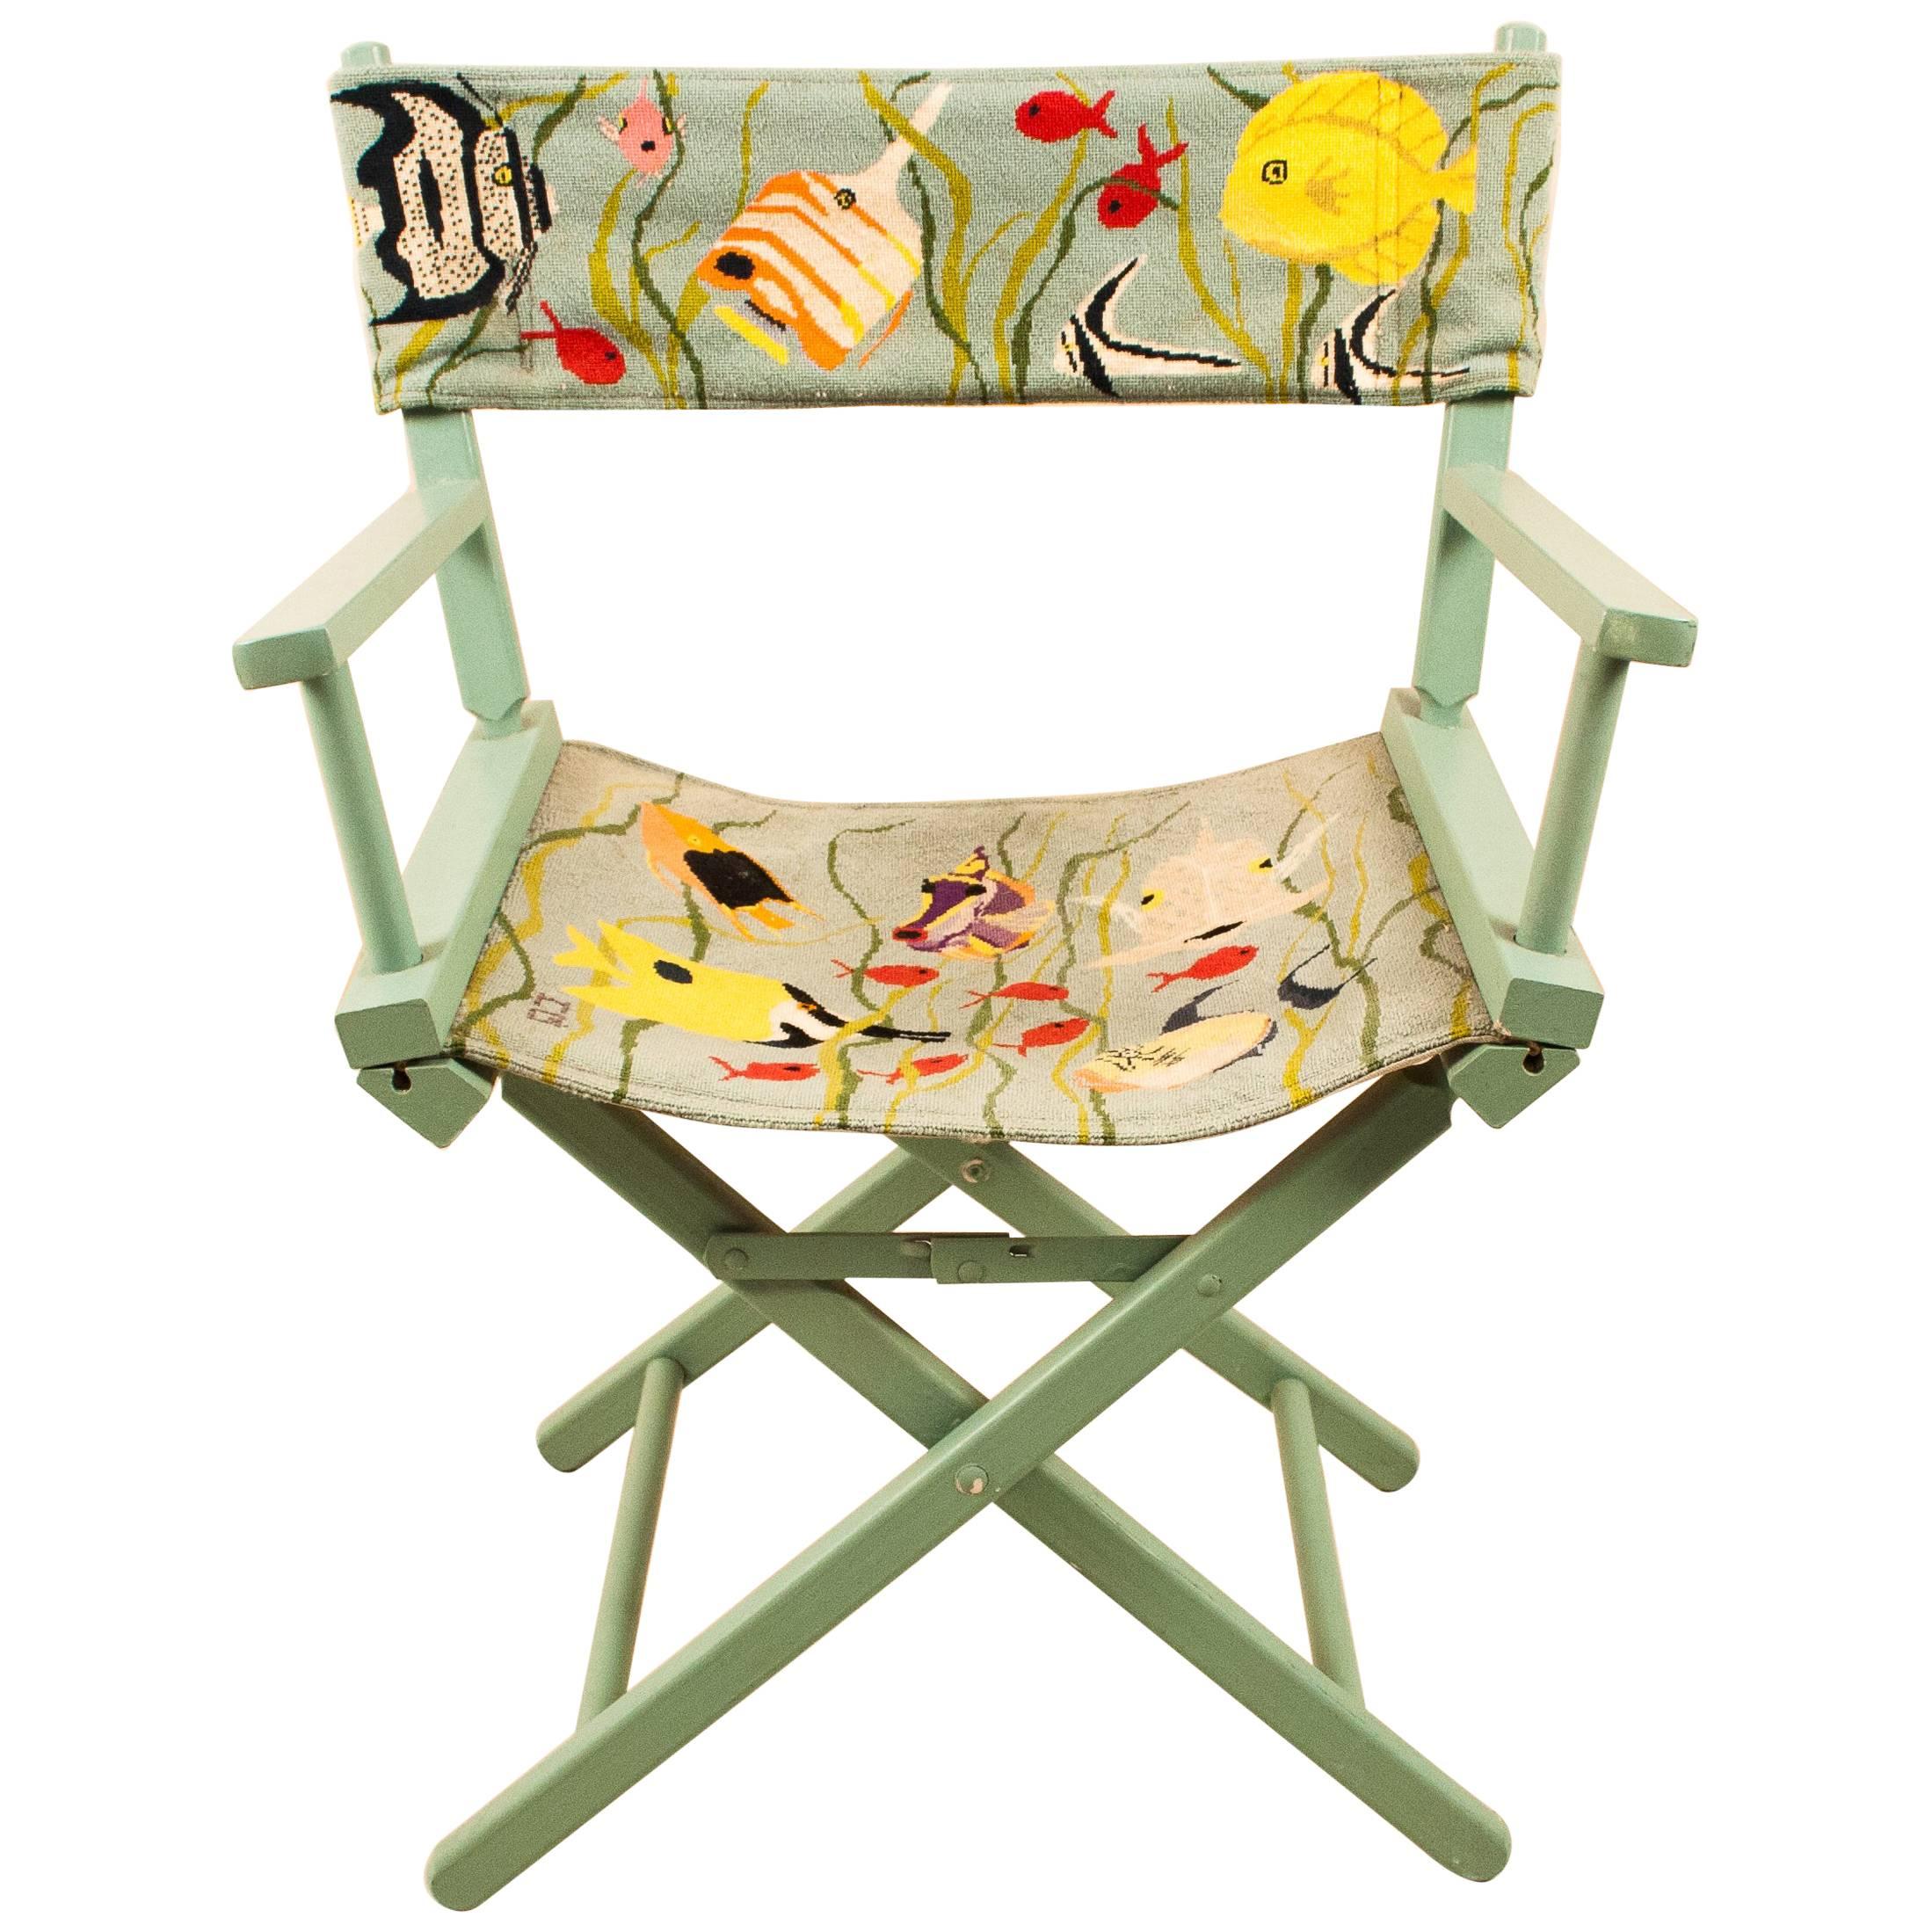 Director's Chair with Needlepoint Tropical Fish Fabric